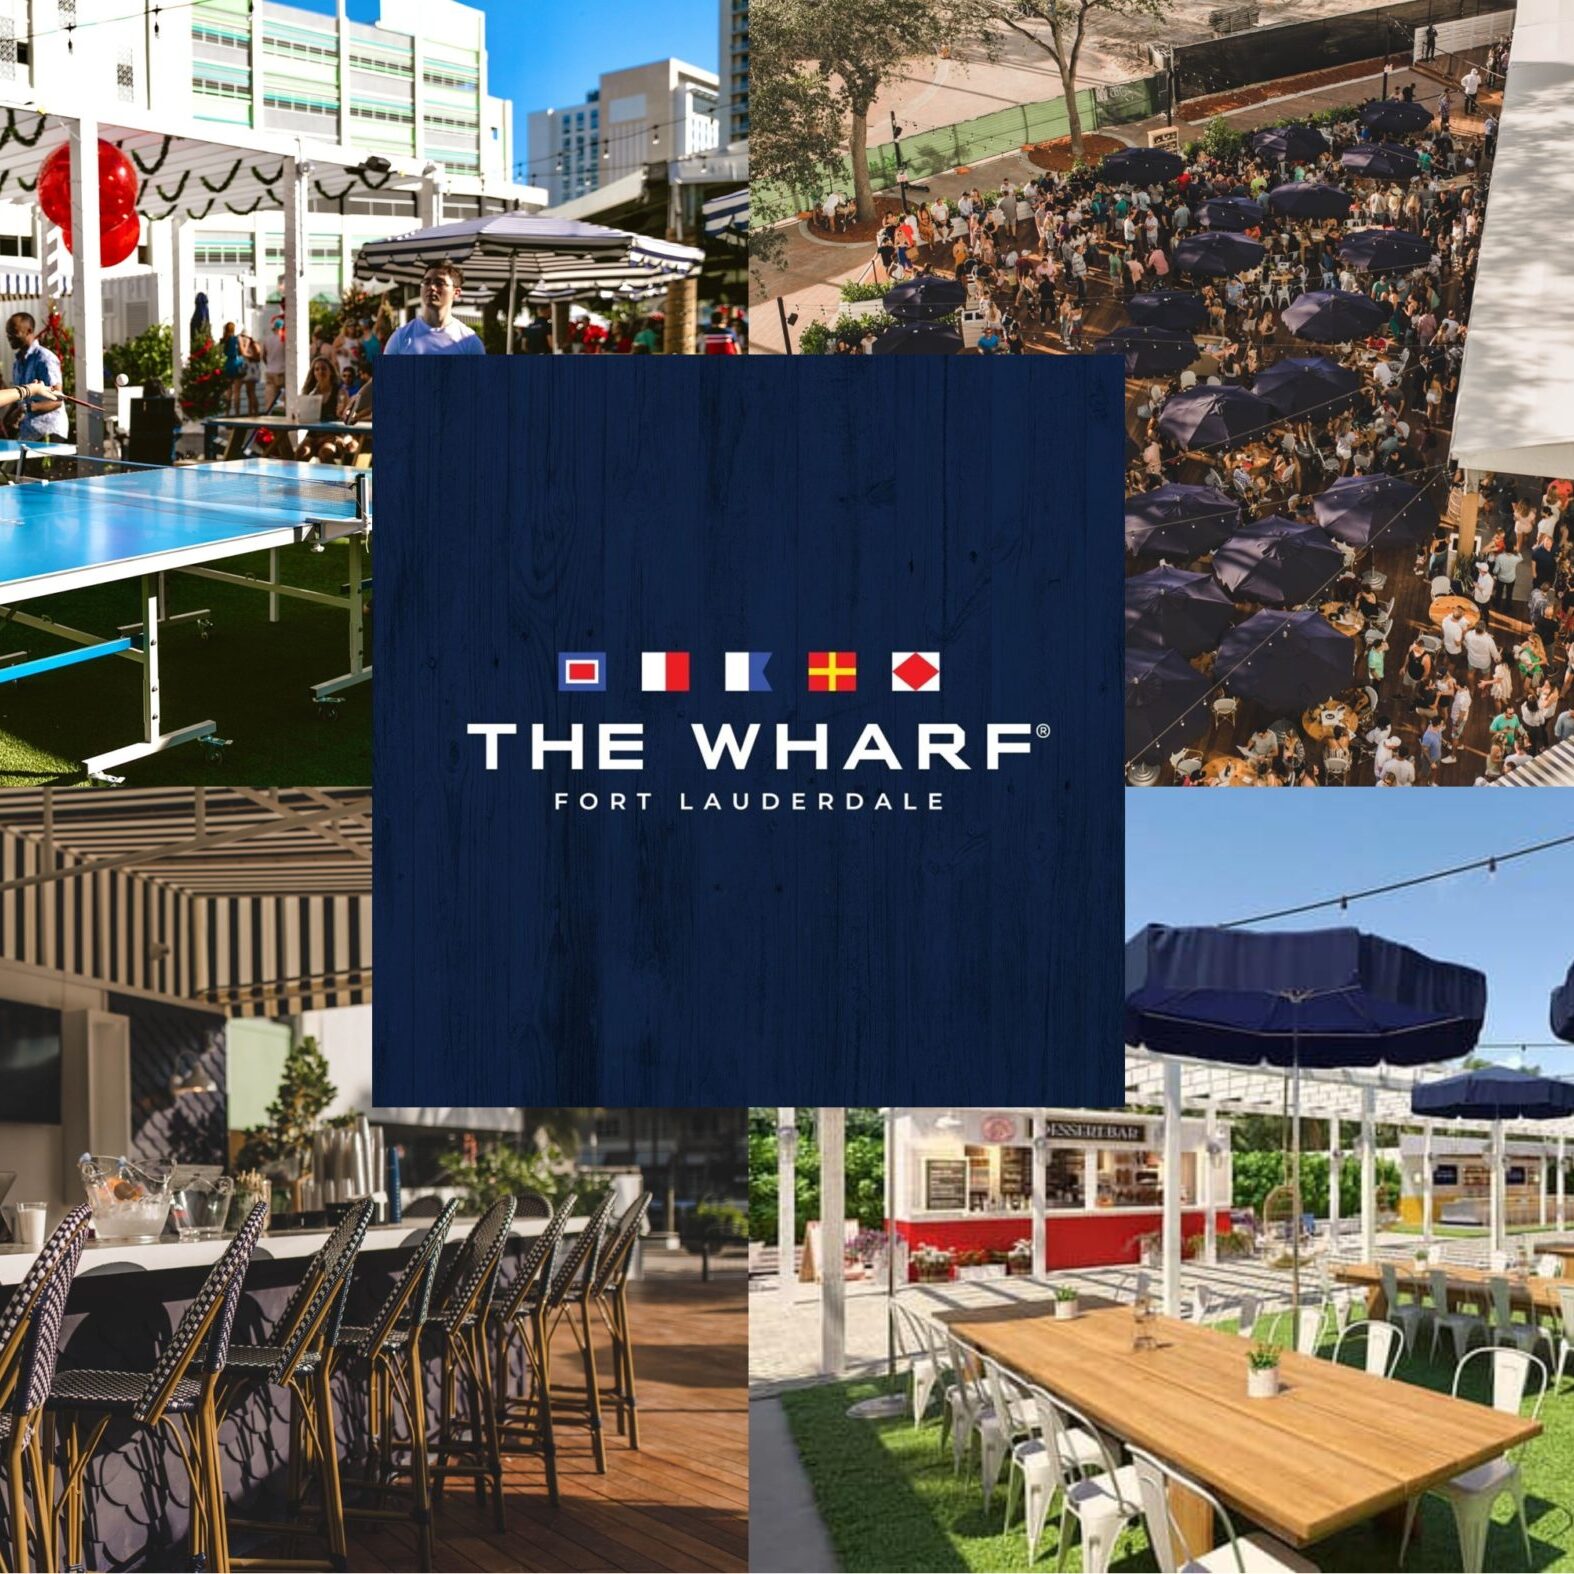 The Wharf Fort Lauderdale